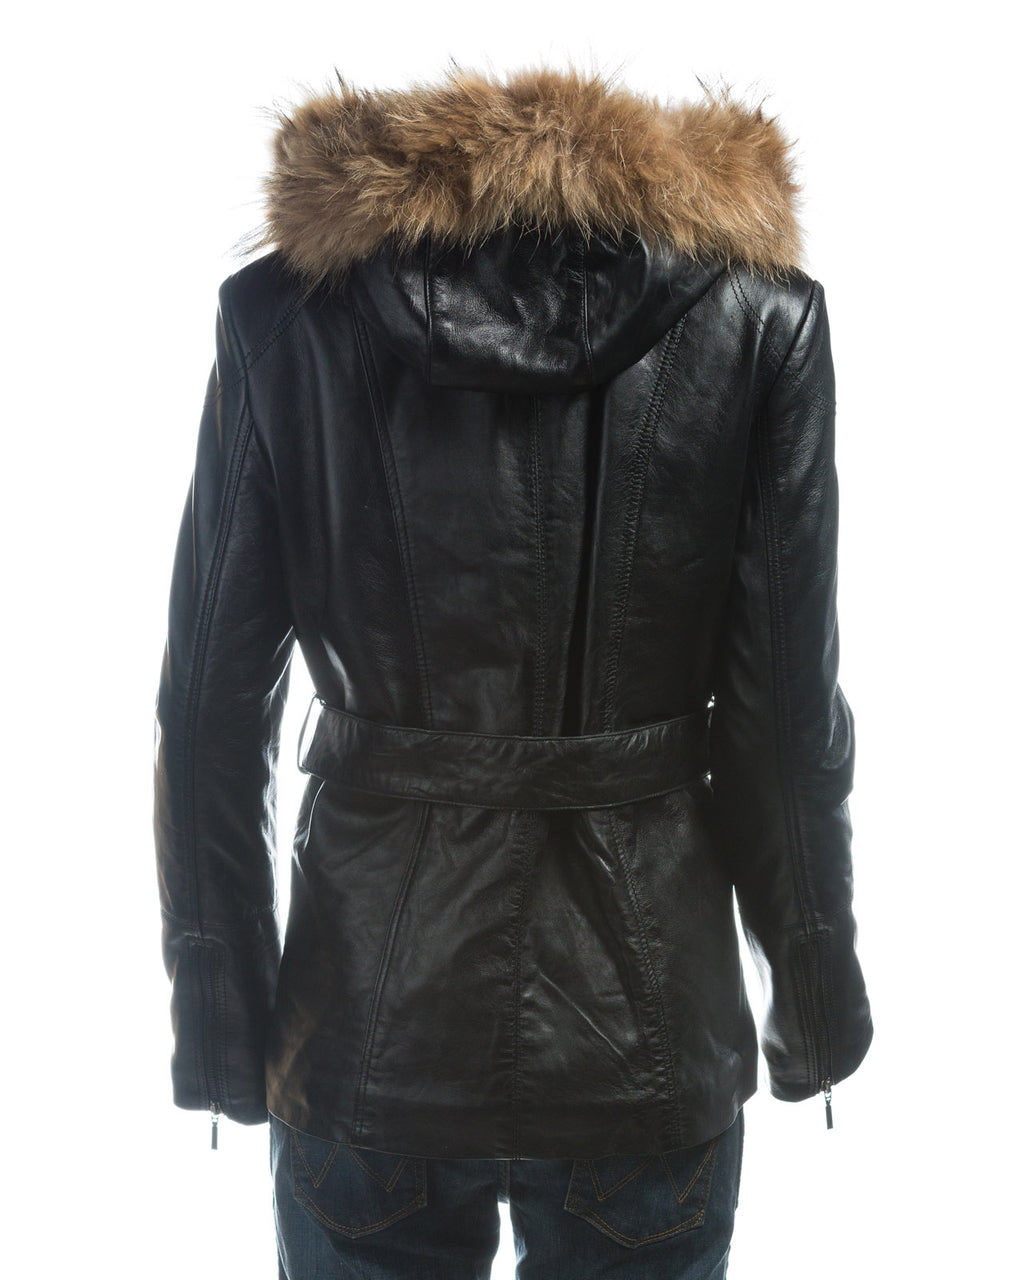 Ladies Black Belted Leather Coat With Detachable Fur Trimmed Hood: Paola